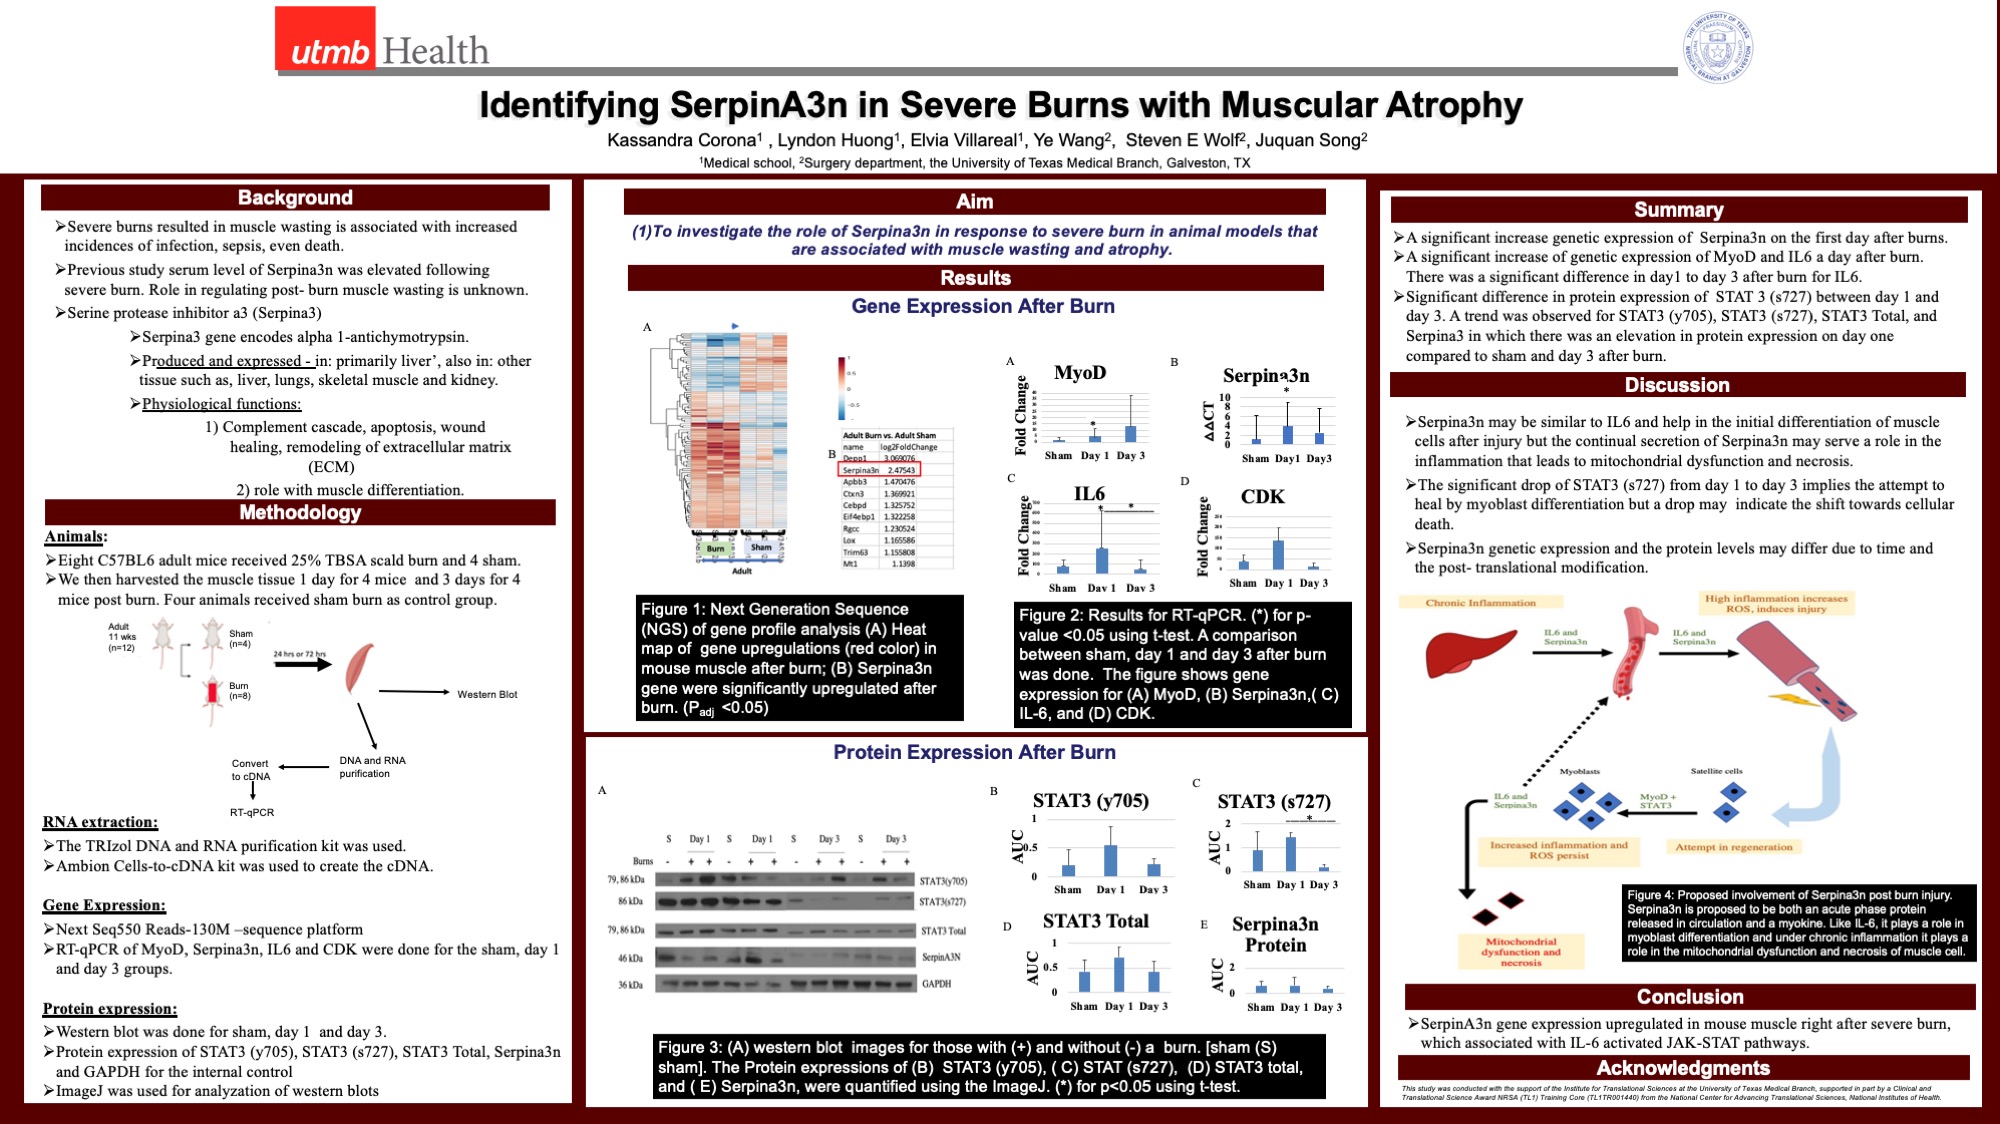 Research poster outlining study on severe burns with muscular atrophy by Kassandra Corona et al.